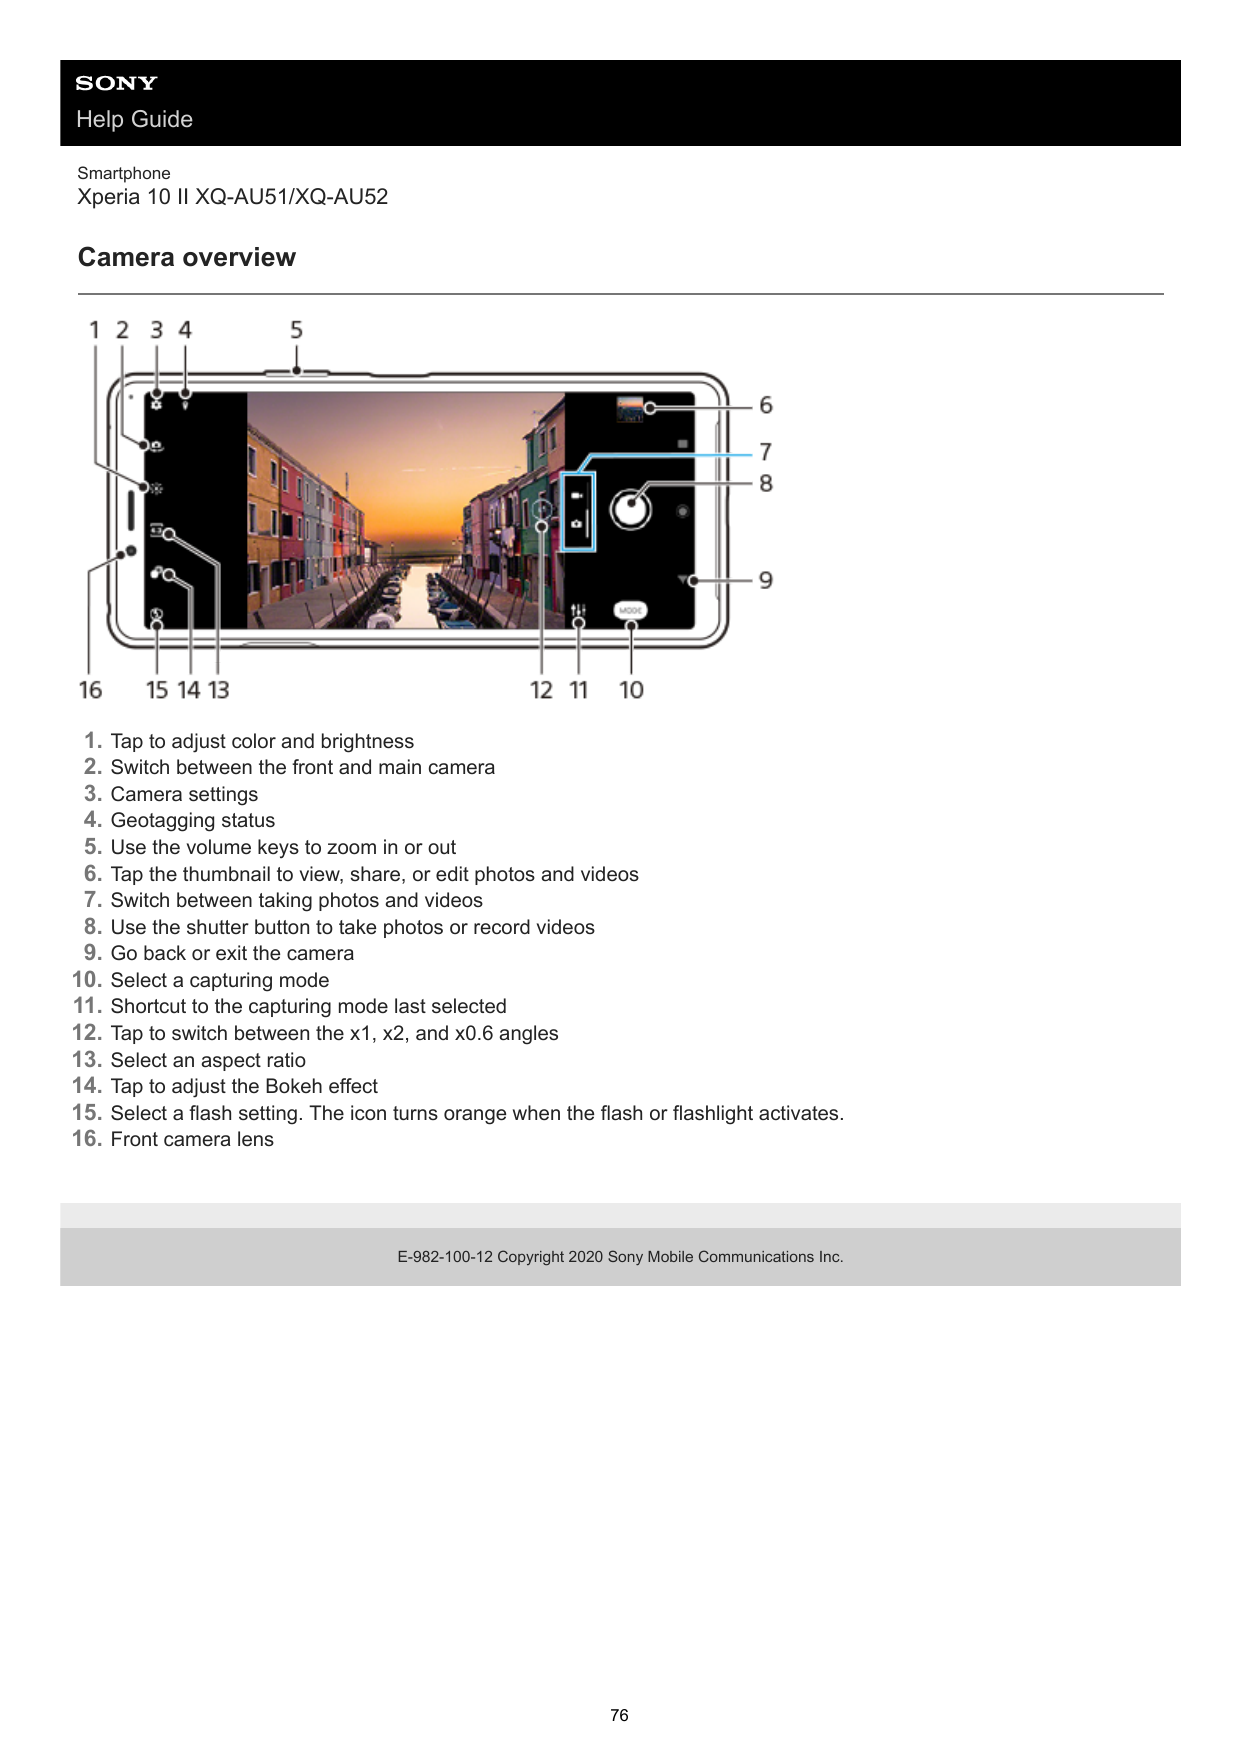 Help GuideSmartphoneXperia 10 II XQ-AU51/XQ-AU52Camera overview1.2.3.4.5.6.7.8.9.10.11.12.13.14.15.16.Tap to adjust color and br